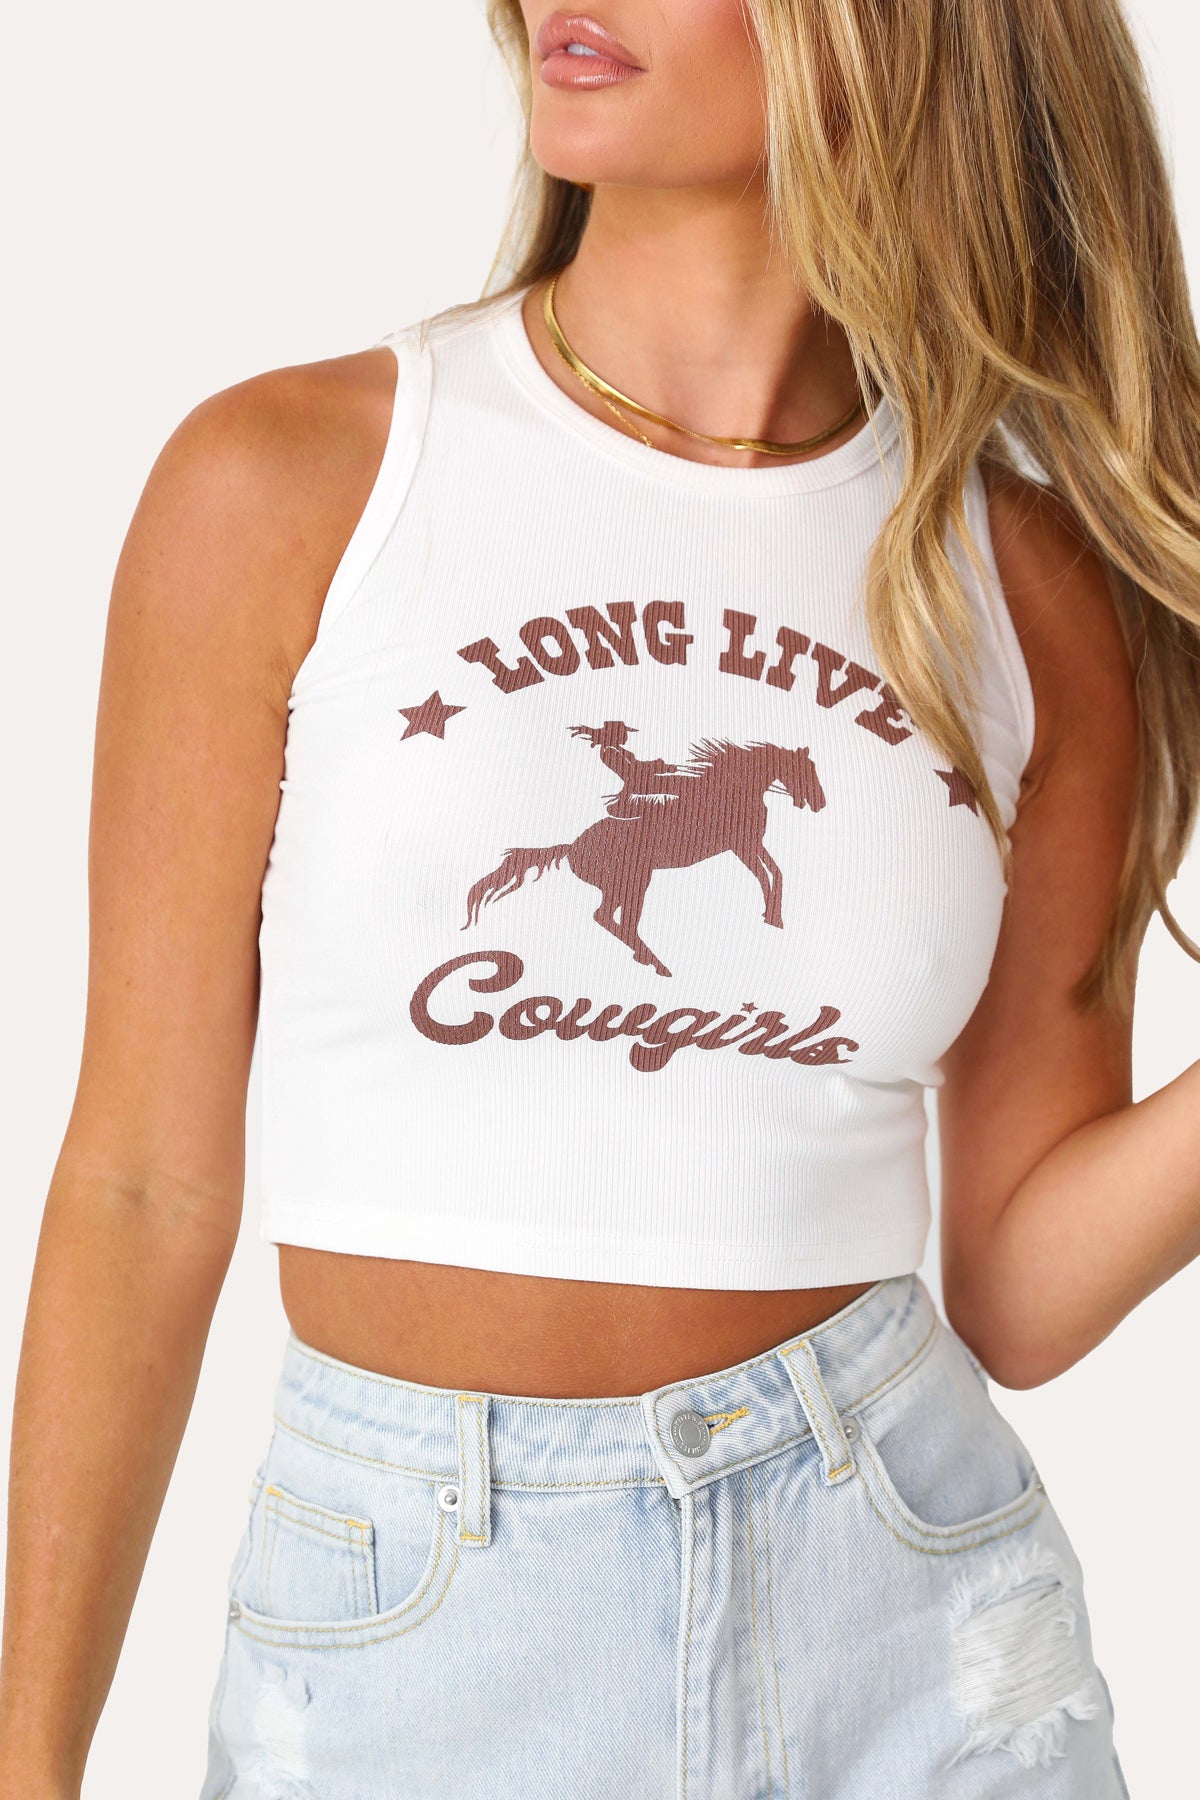 Model wearing the Long Live Cowgirls tank top.